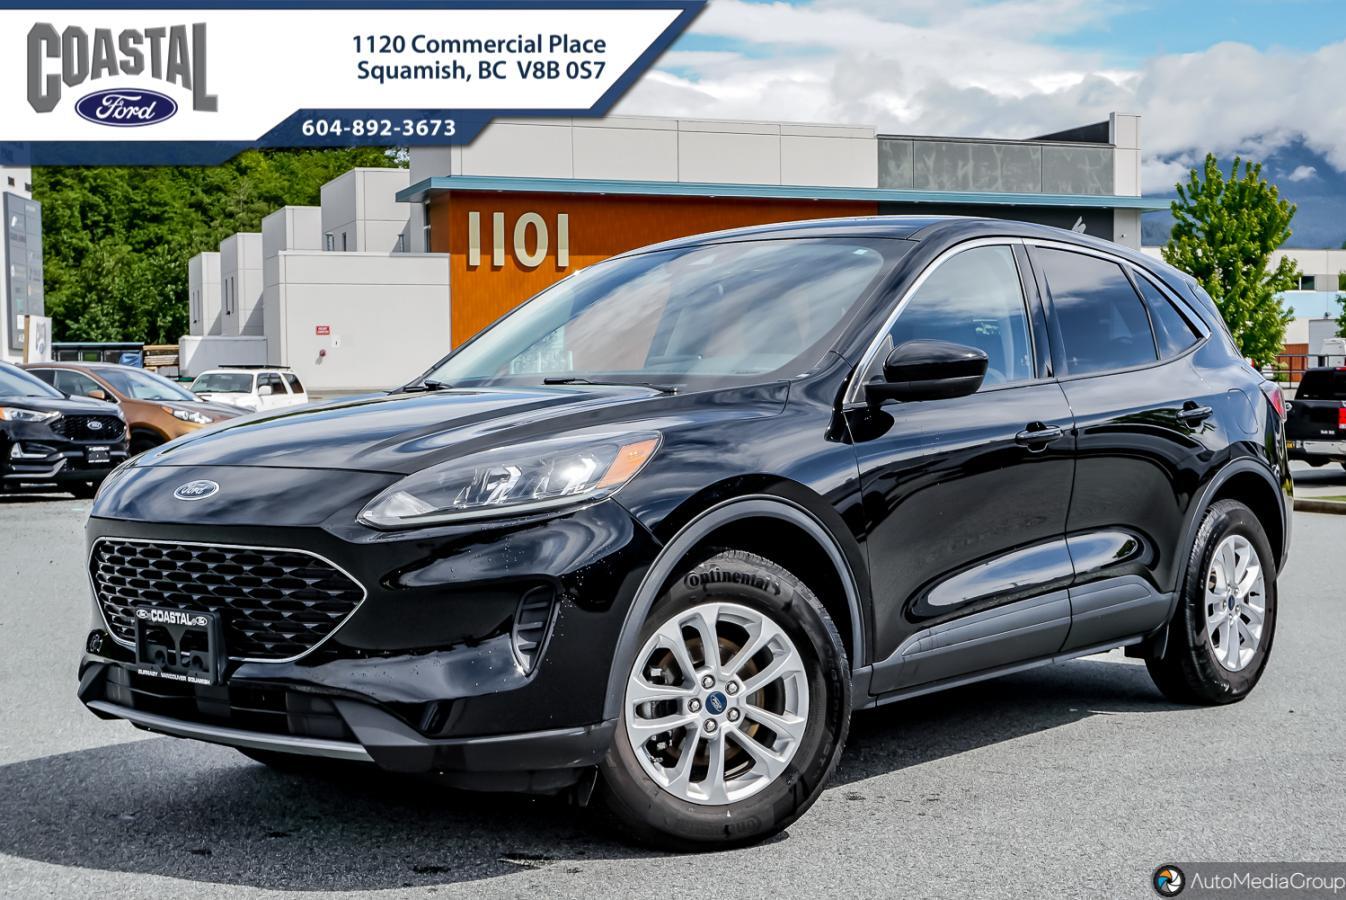 2020 Ford Escape SE | All-Wheel Drive | Navigation | Heated Seats